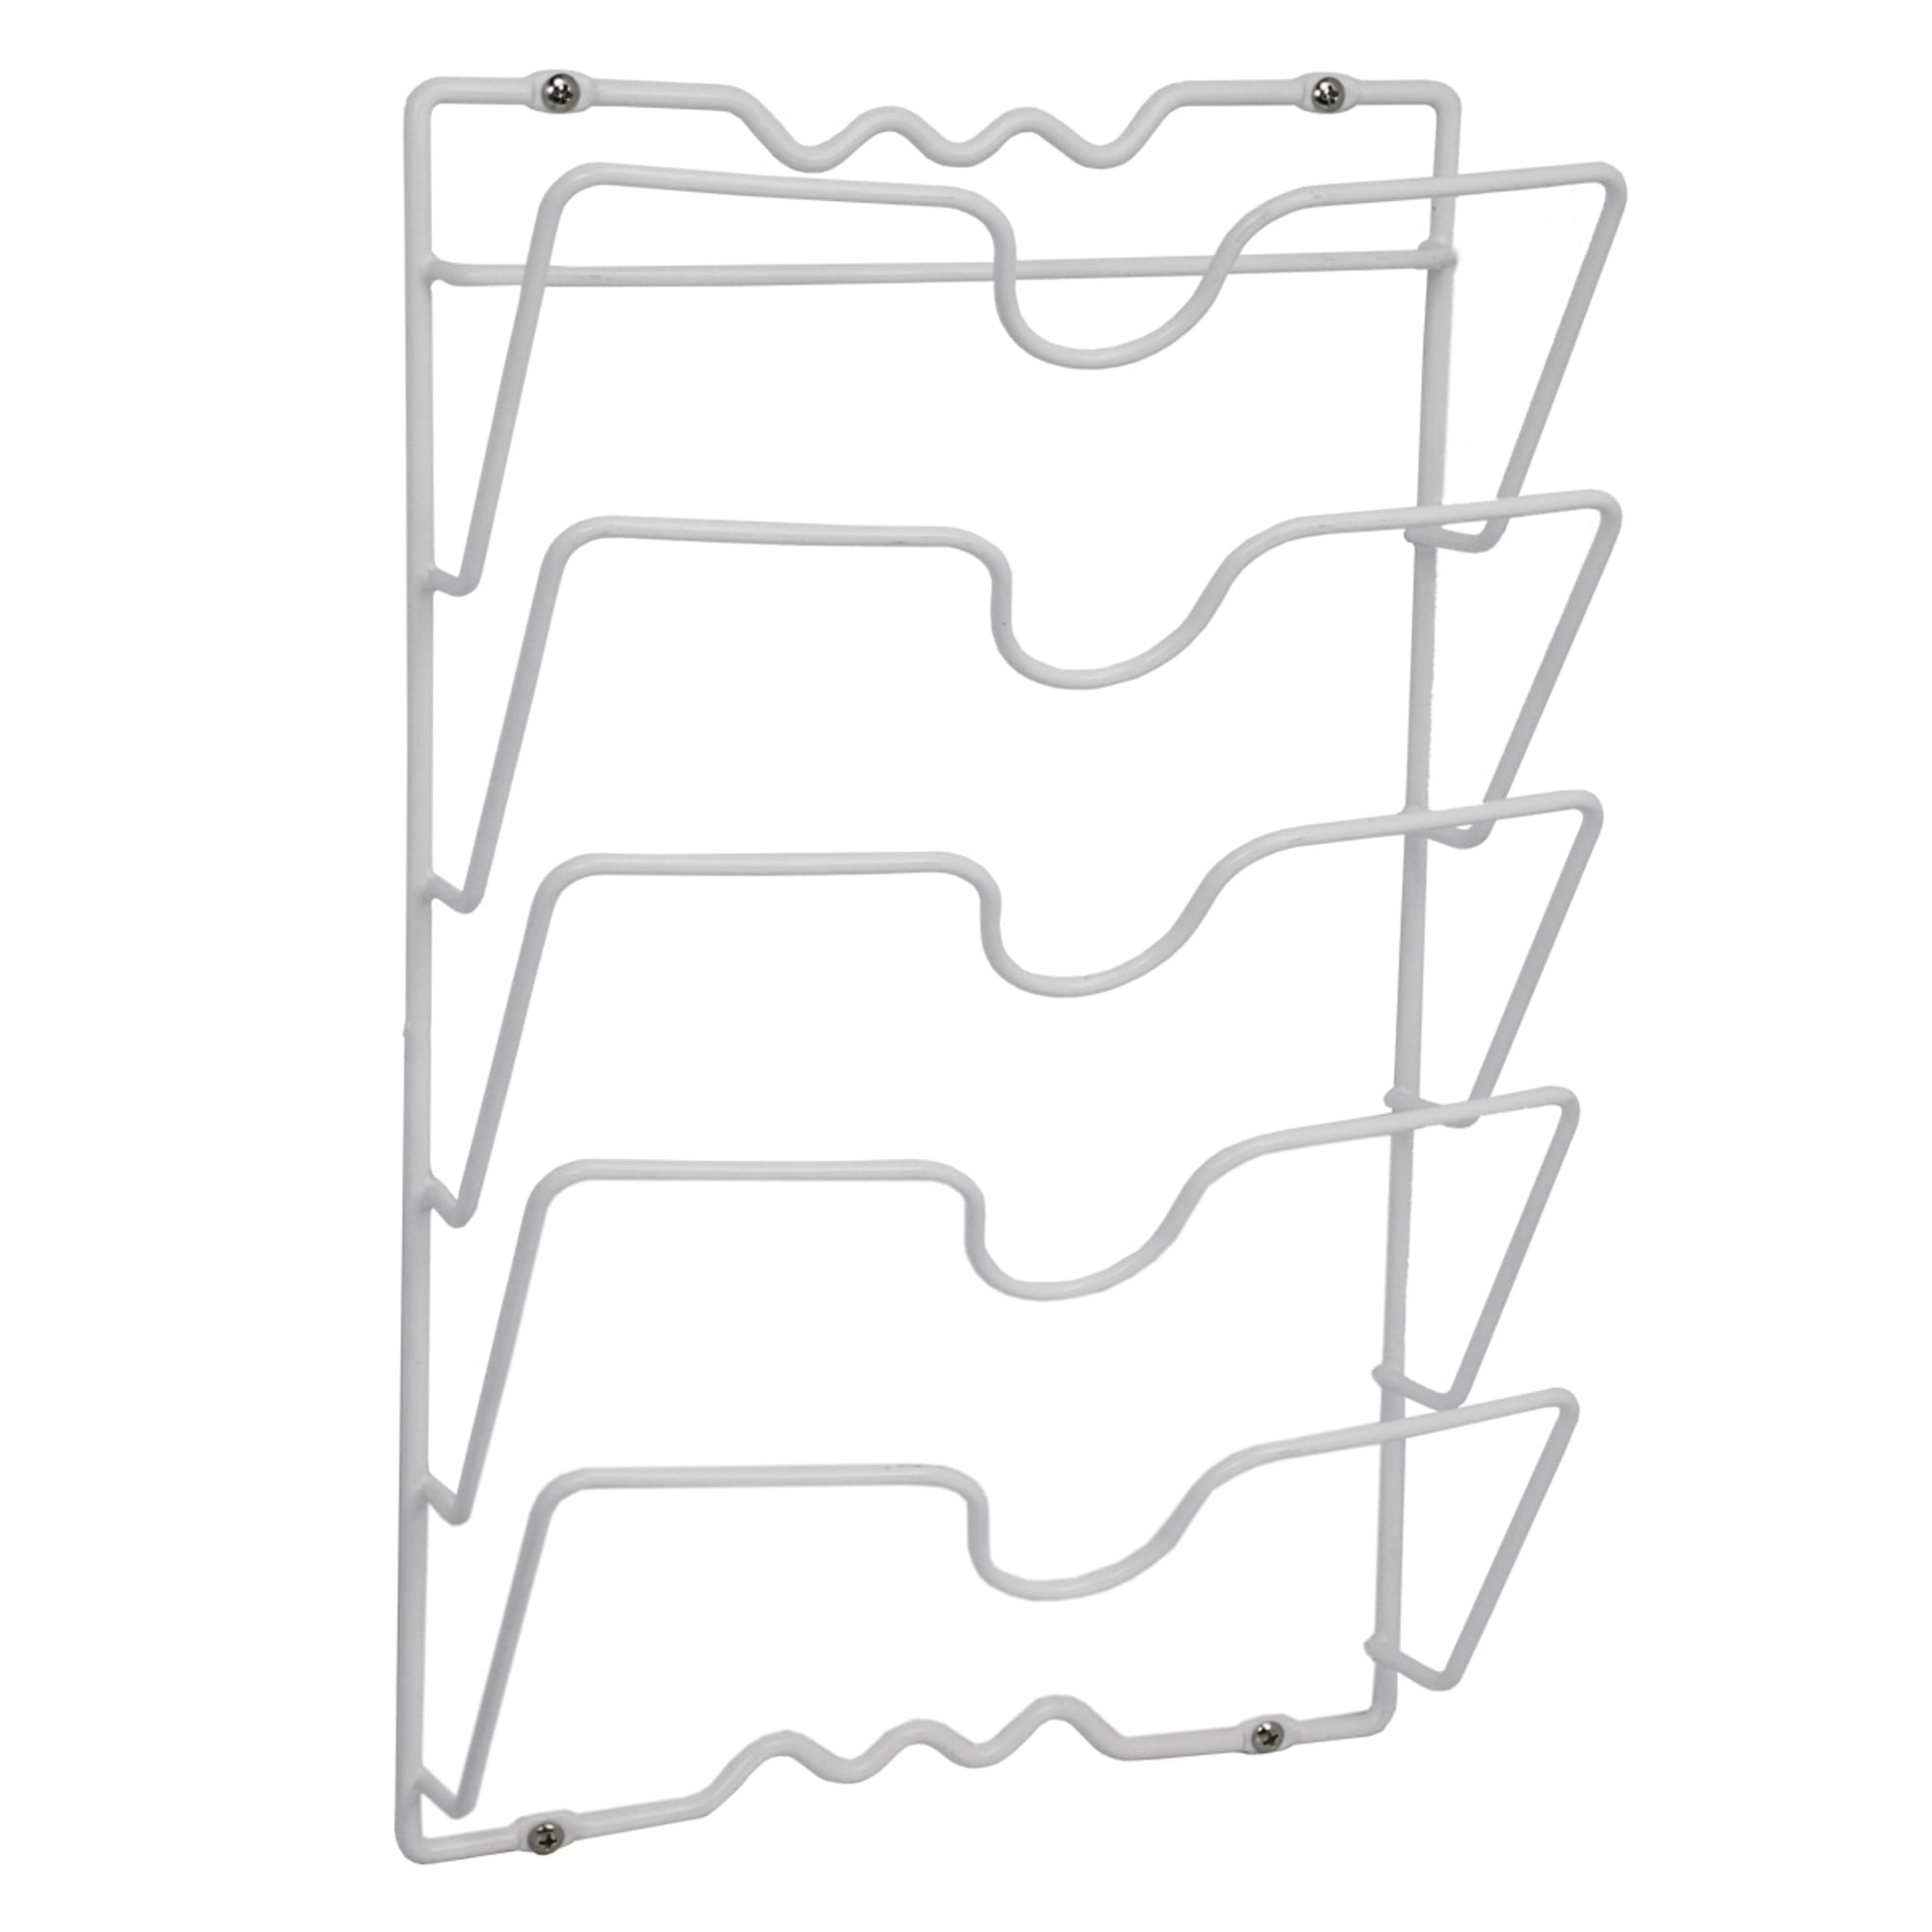 Home Basics Wall or Cabinet Mount Lid Rack $10.00 EACH, CASE PACK OF 12